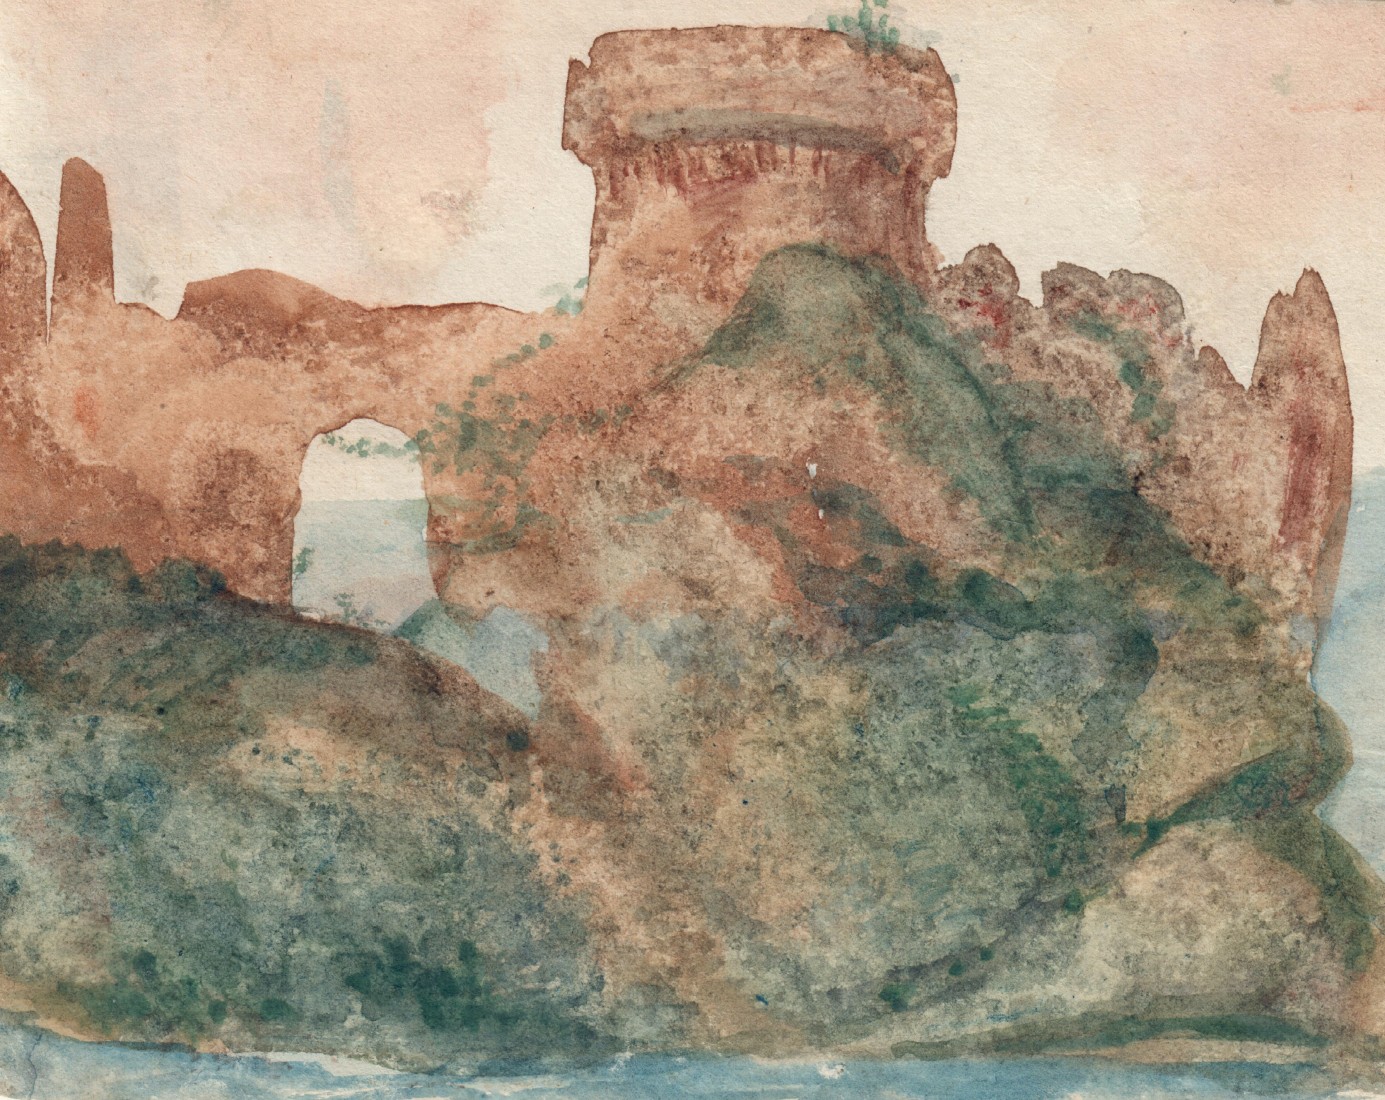 George Sand, Landscape with a View of the Sea and a Fort    Watercolor on paper 3 5/16 x 4 1/8 inches